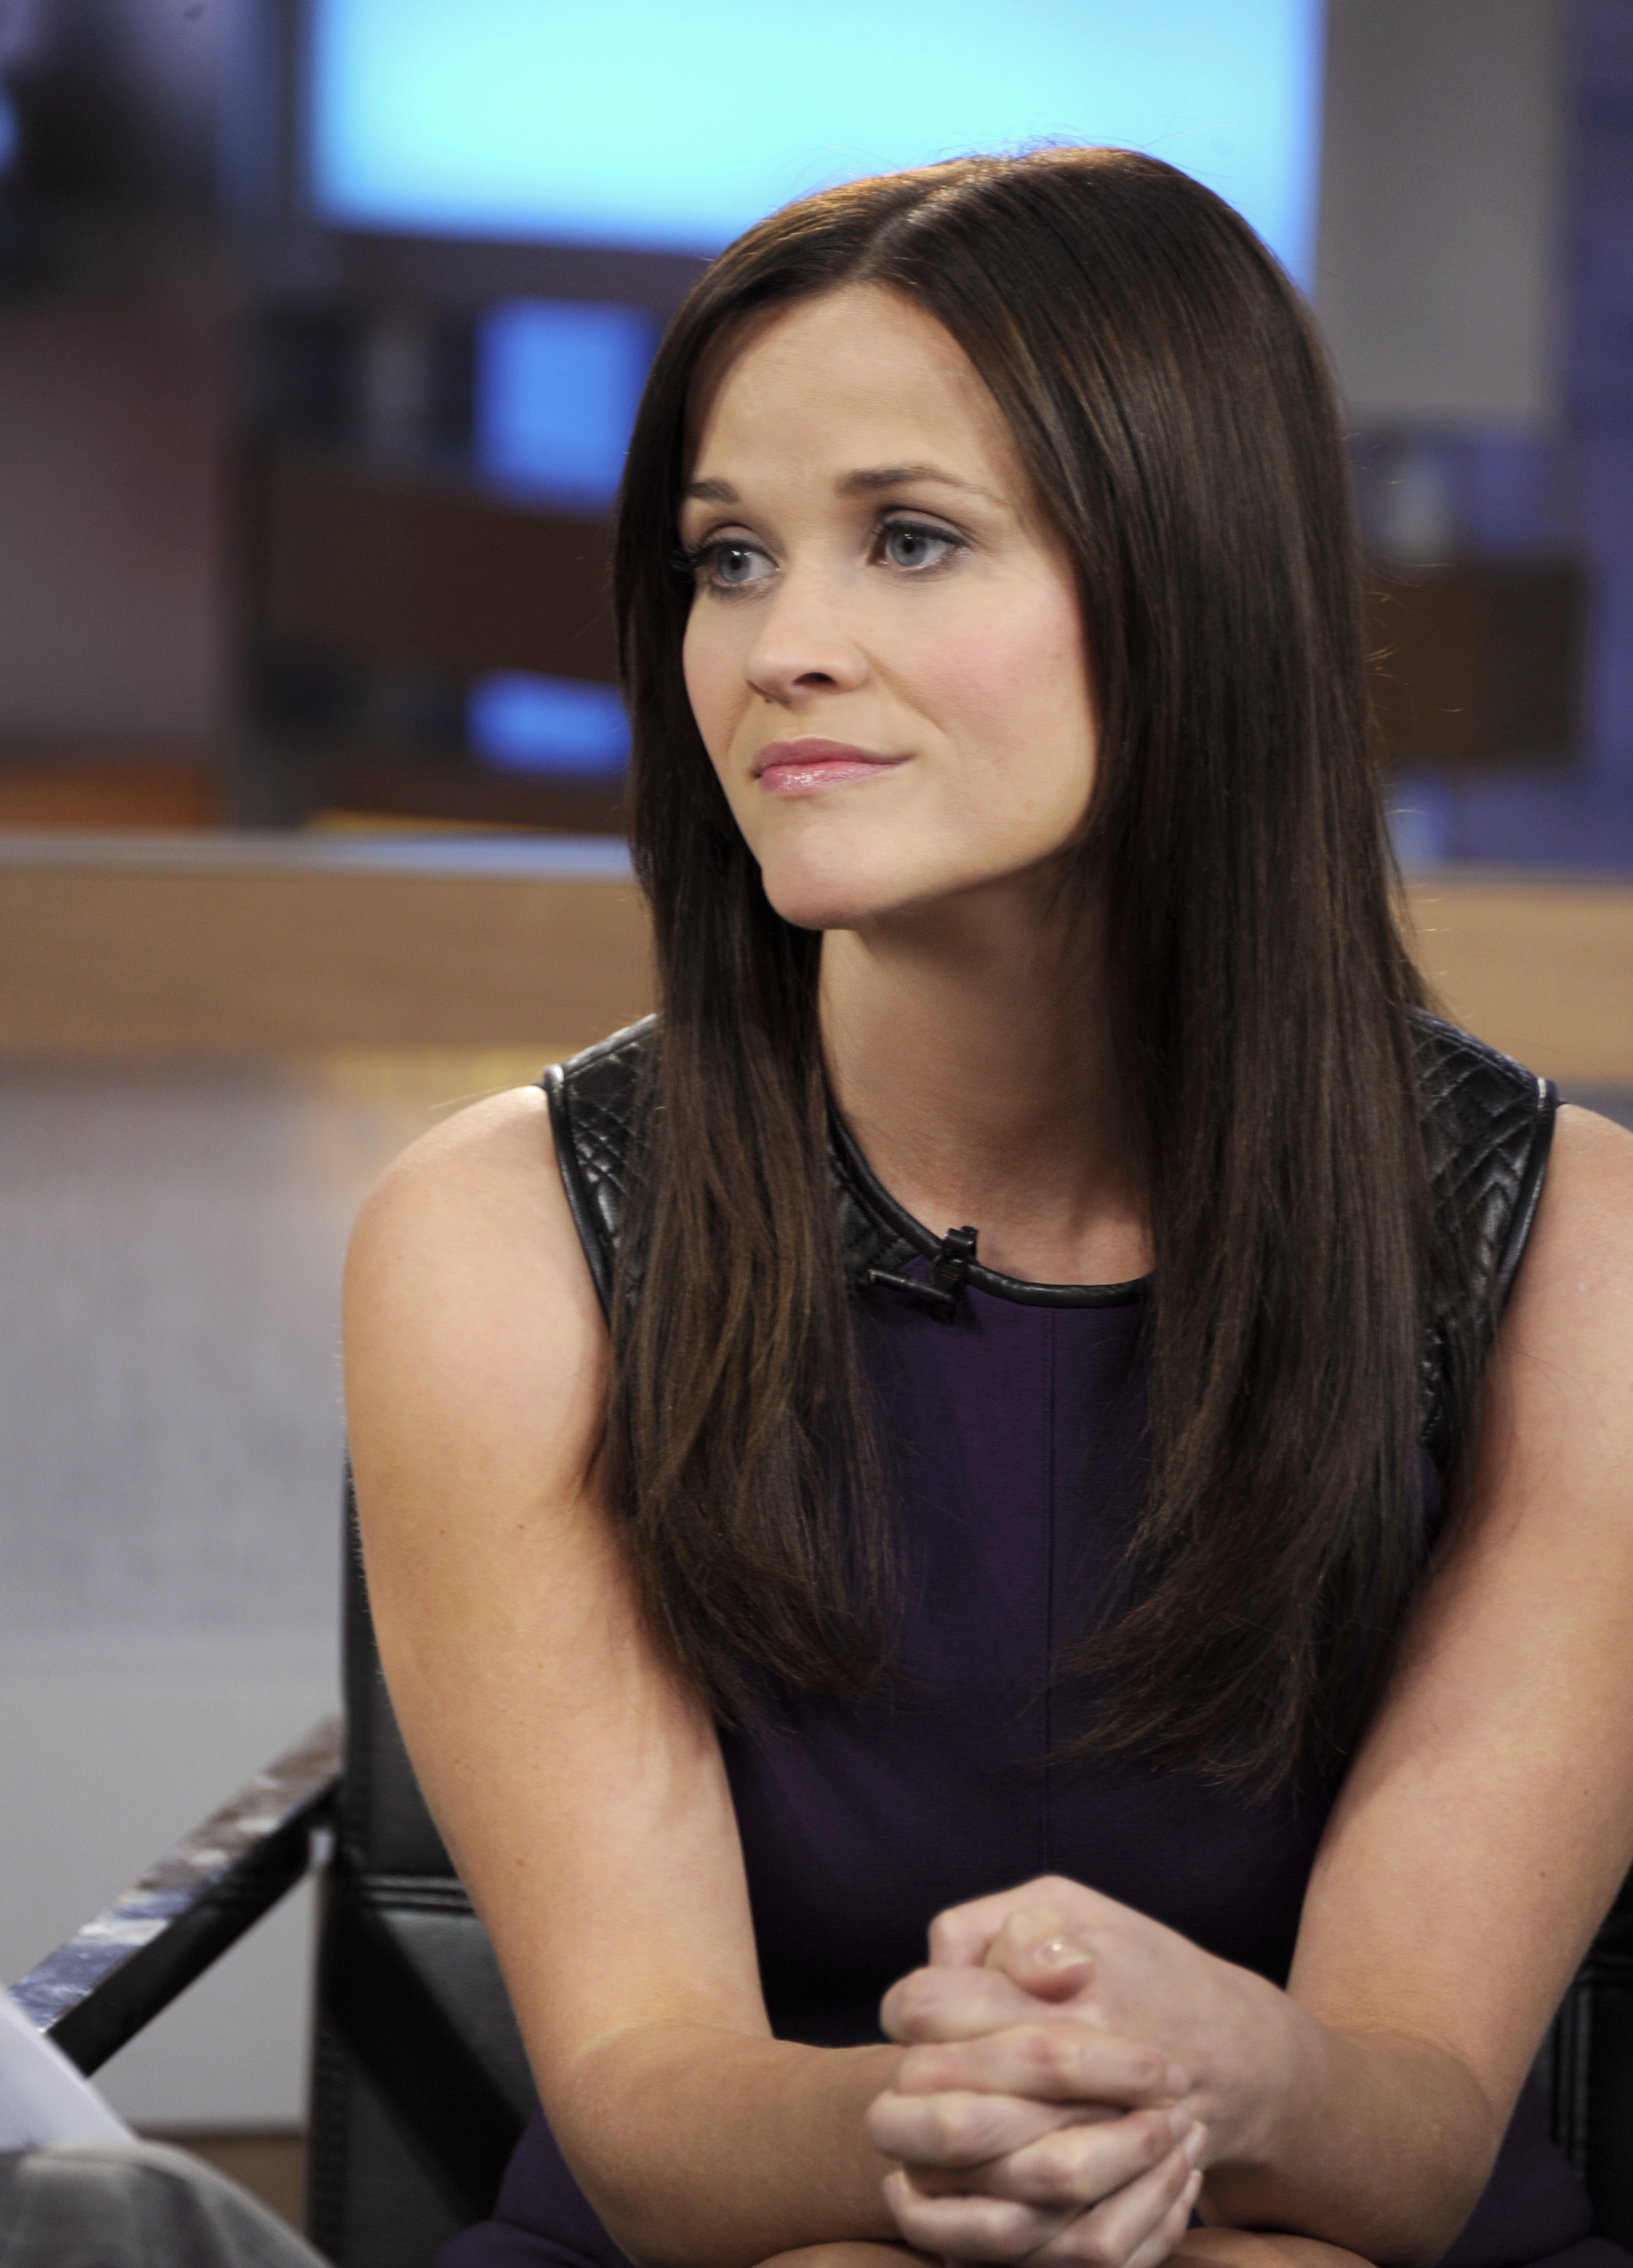 Reese Witherspoon during an interview on "Good Morning America" on May 2, 2013 | Source: Getty Images